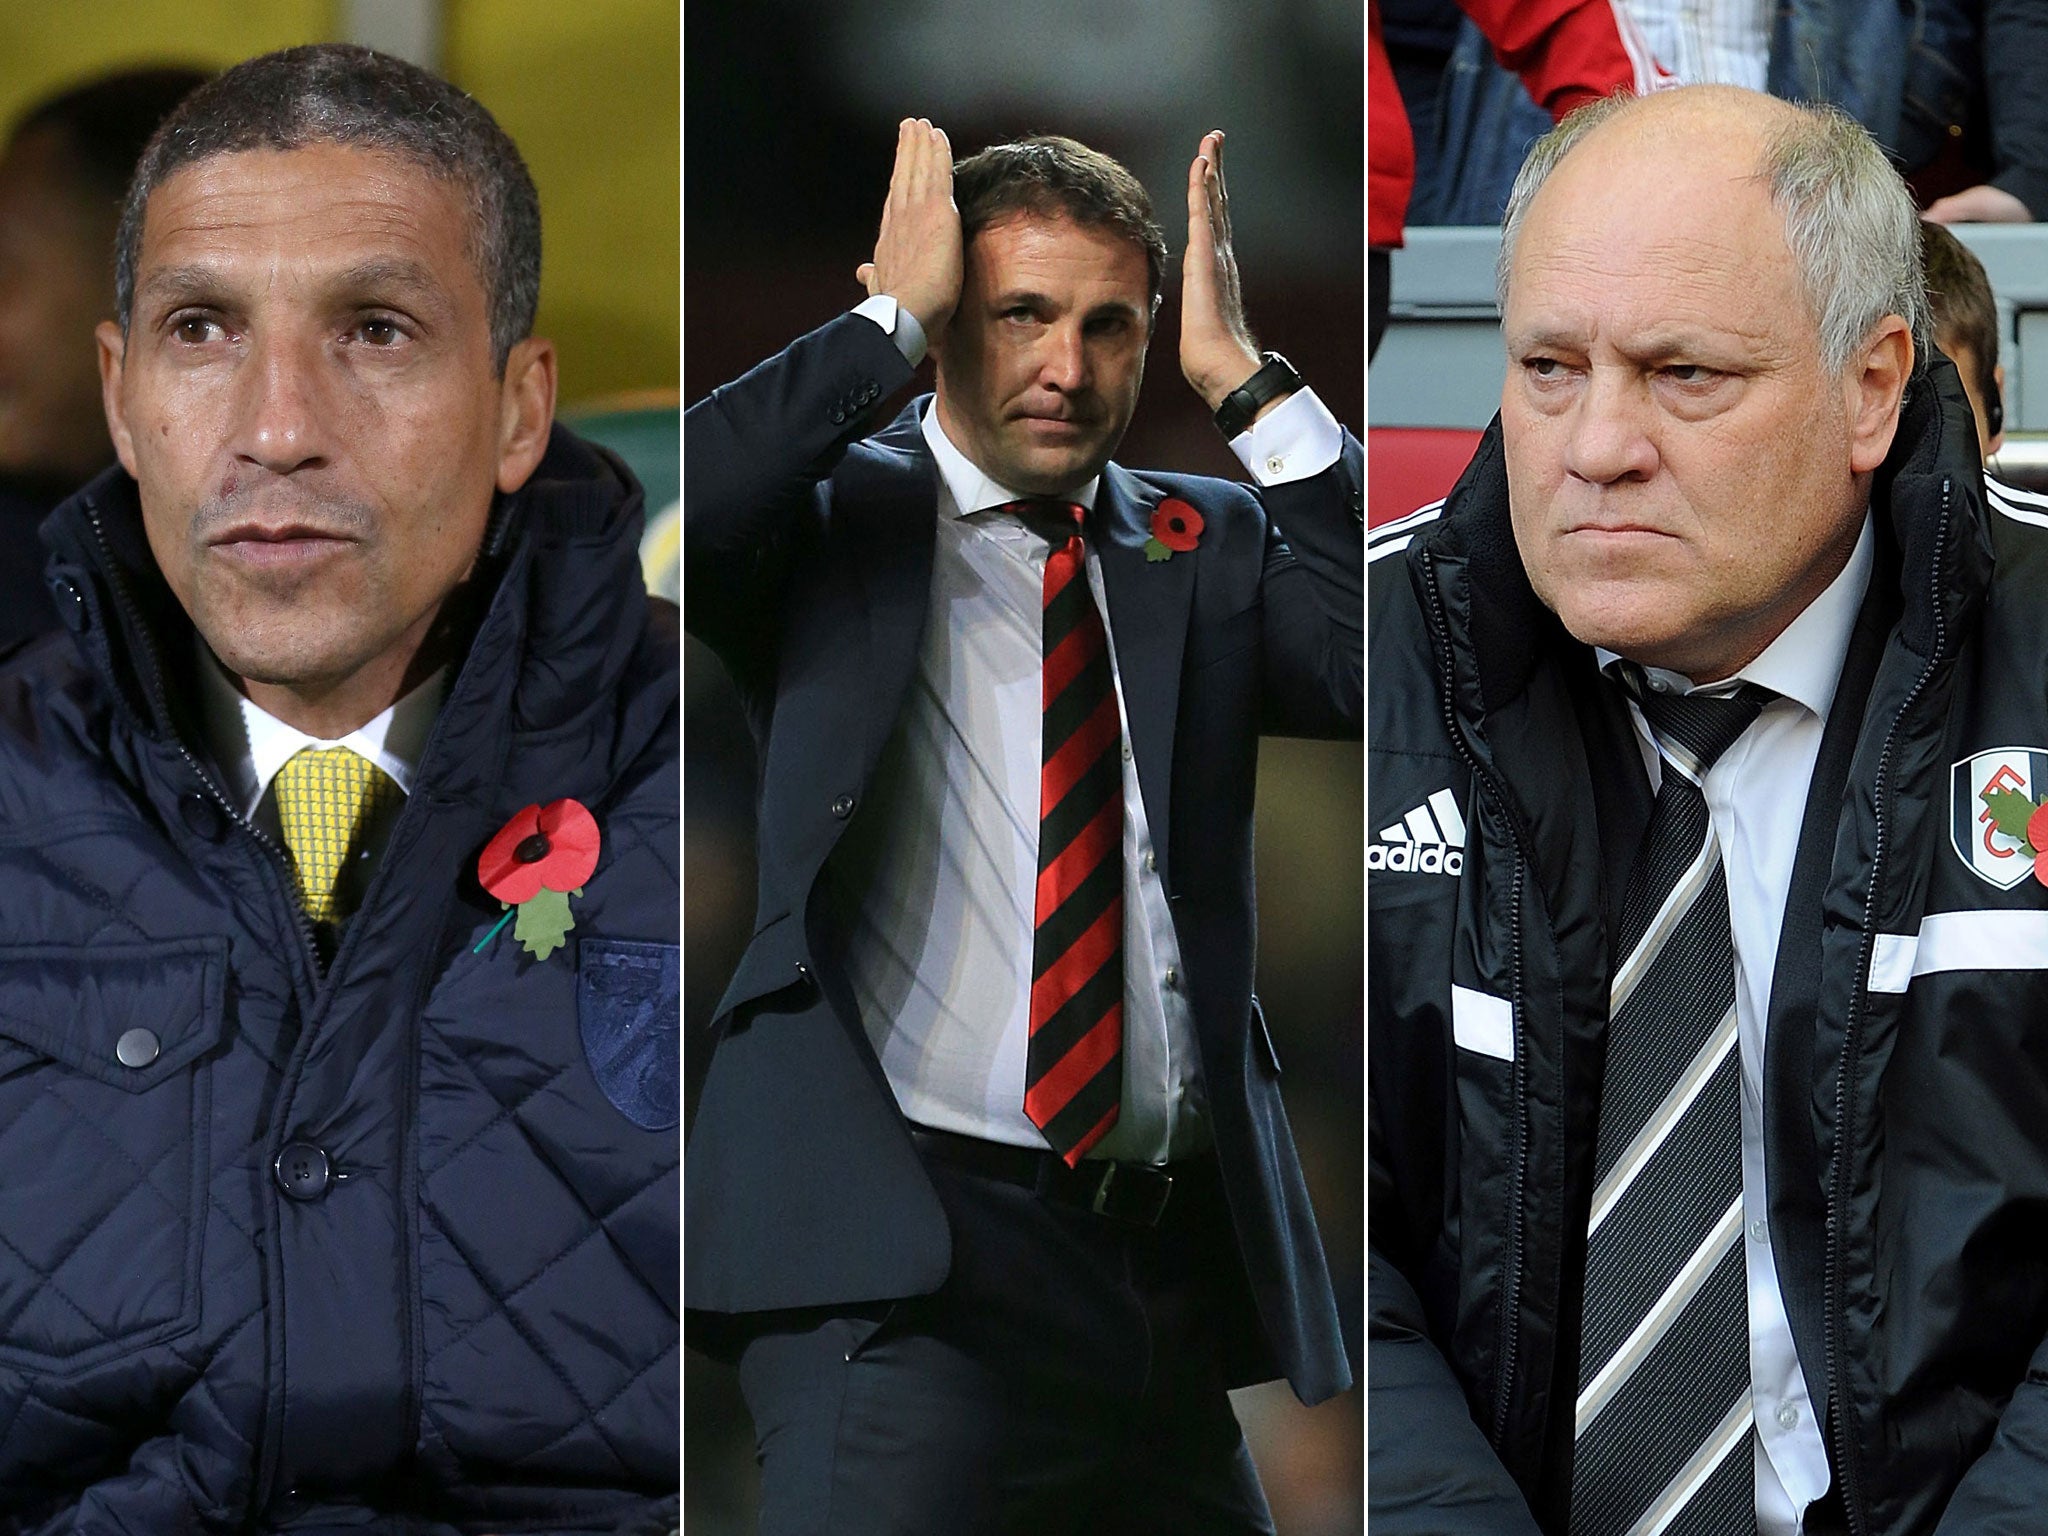 Managers in the firing line, from left, Chris Hughton of Norwich, Malky Mackay of Cardiff, and Fulham’s Martin Jol